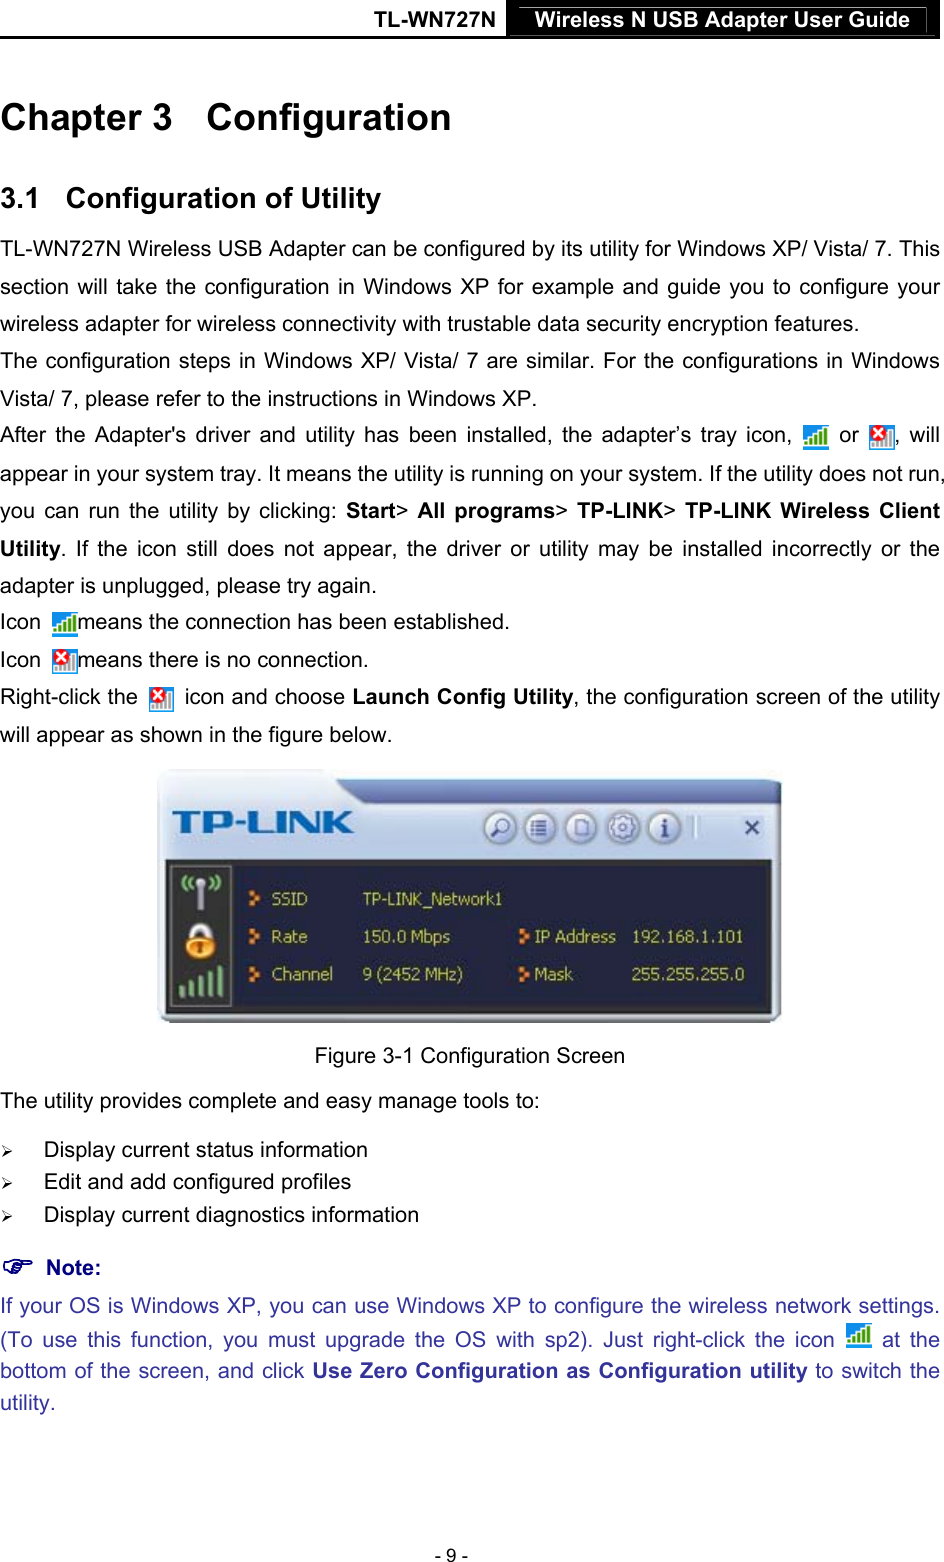 TL-WN727N Wireless N USB Adapter User Guide  - 9 - Chapter 3  3BConfiguration 3.1  14BConfiguration of Utility TL-WN727N Wireless USB Adapter can be configured by its utility for Windows XP/ Vista/ 7. This section will take the configuration in Windows XP for example and guide you to configure your wireless adapter for wireless connectivity with trustable data security encryption features. The configuration steps in Windows XP/ Vista/ 7 are similar. For the configurations in Windows Vista/ 7, please refer to the instructions in Windows XP. After the Adapter&apos;s driver and utility has been installed, the adapter’s tray icon,   or  , will appear in your system tray. It means the utility is running on your system. If the utility does not run, you can run the utility by clicking: Start&gt; All programs&gt; TP-LINK&gt; TP-LINK Wireless Client Utility. If the icon still does not appear, the driver or utility may be installed incorrectly or the adapter is unplugged, please try again.   Icon  means the connection has been established.   Icon  means there is no connection.   Right-click the   icon and choose Launch Config Utility, the configuration screen of the utility will appear as shown in the figure below.    Figure 3-1 Configuration Screen The utility provides complete and easy manage tools to: ¾ Display current status information ¾ Edit and add configured profiles ¾ Display current diagnostics information ) Note:   If your OS is Windows XP, you can use Windows XP to configure the wireless network settings. (To use this function, you must upgrade the OS with sp2). Just right-click the icon   at the bottom of the screen, and click Use Zero Configuration as Configuration utility to switch the utility. 